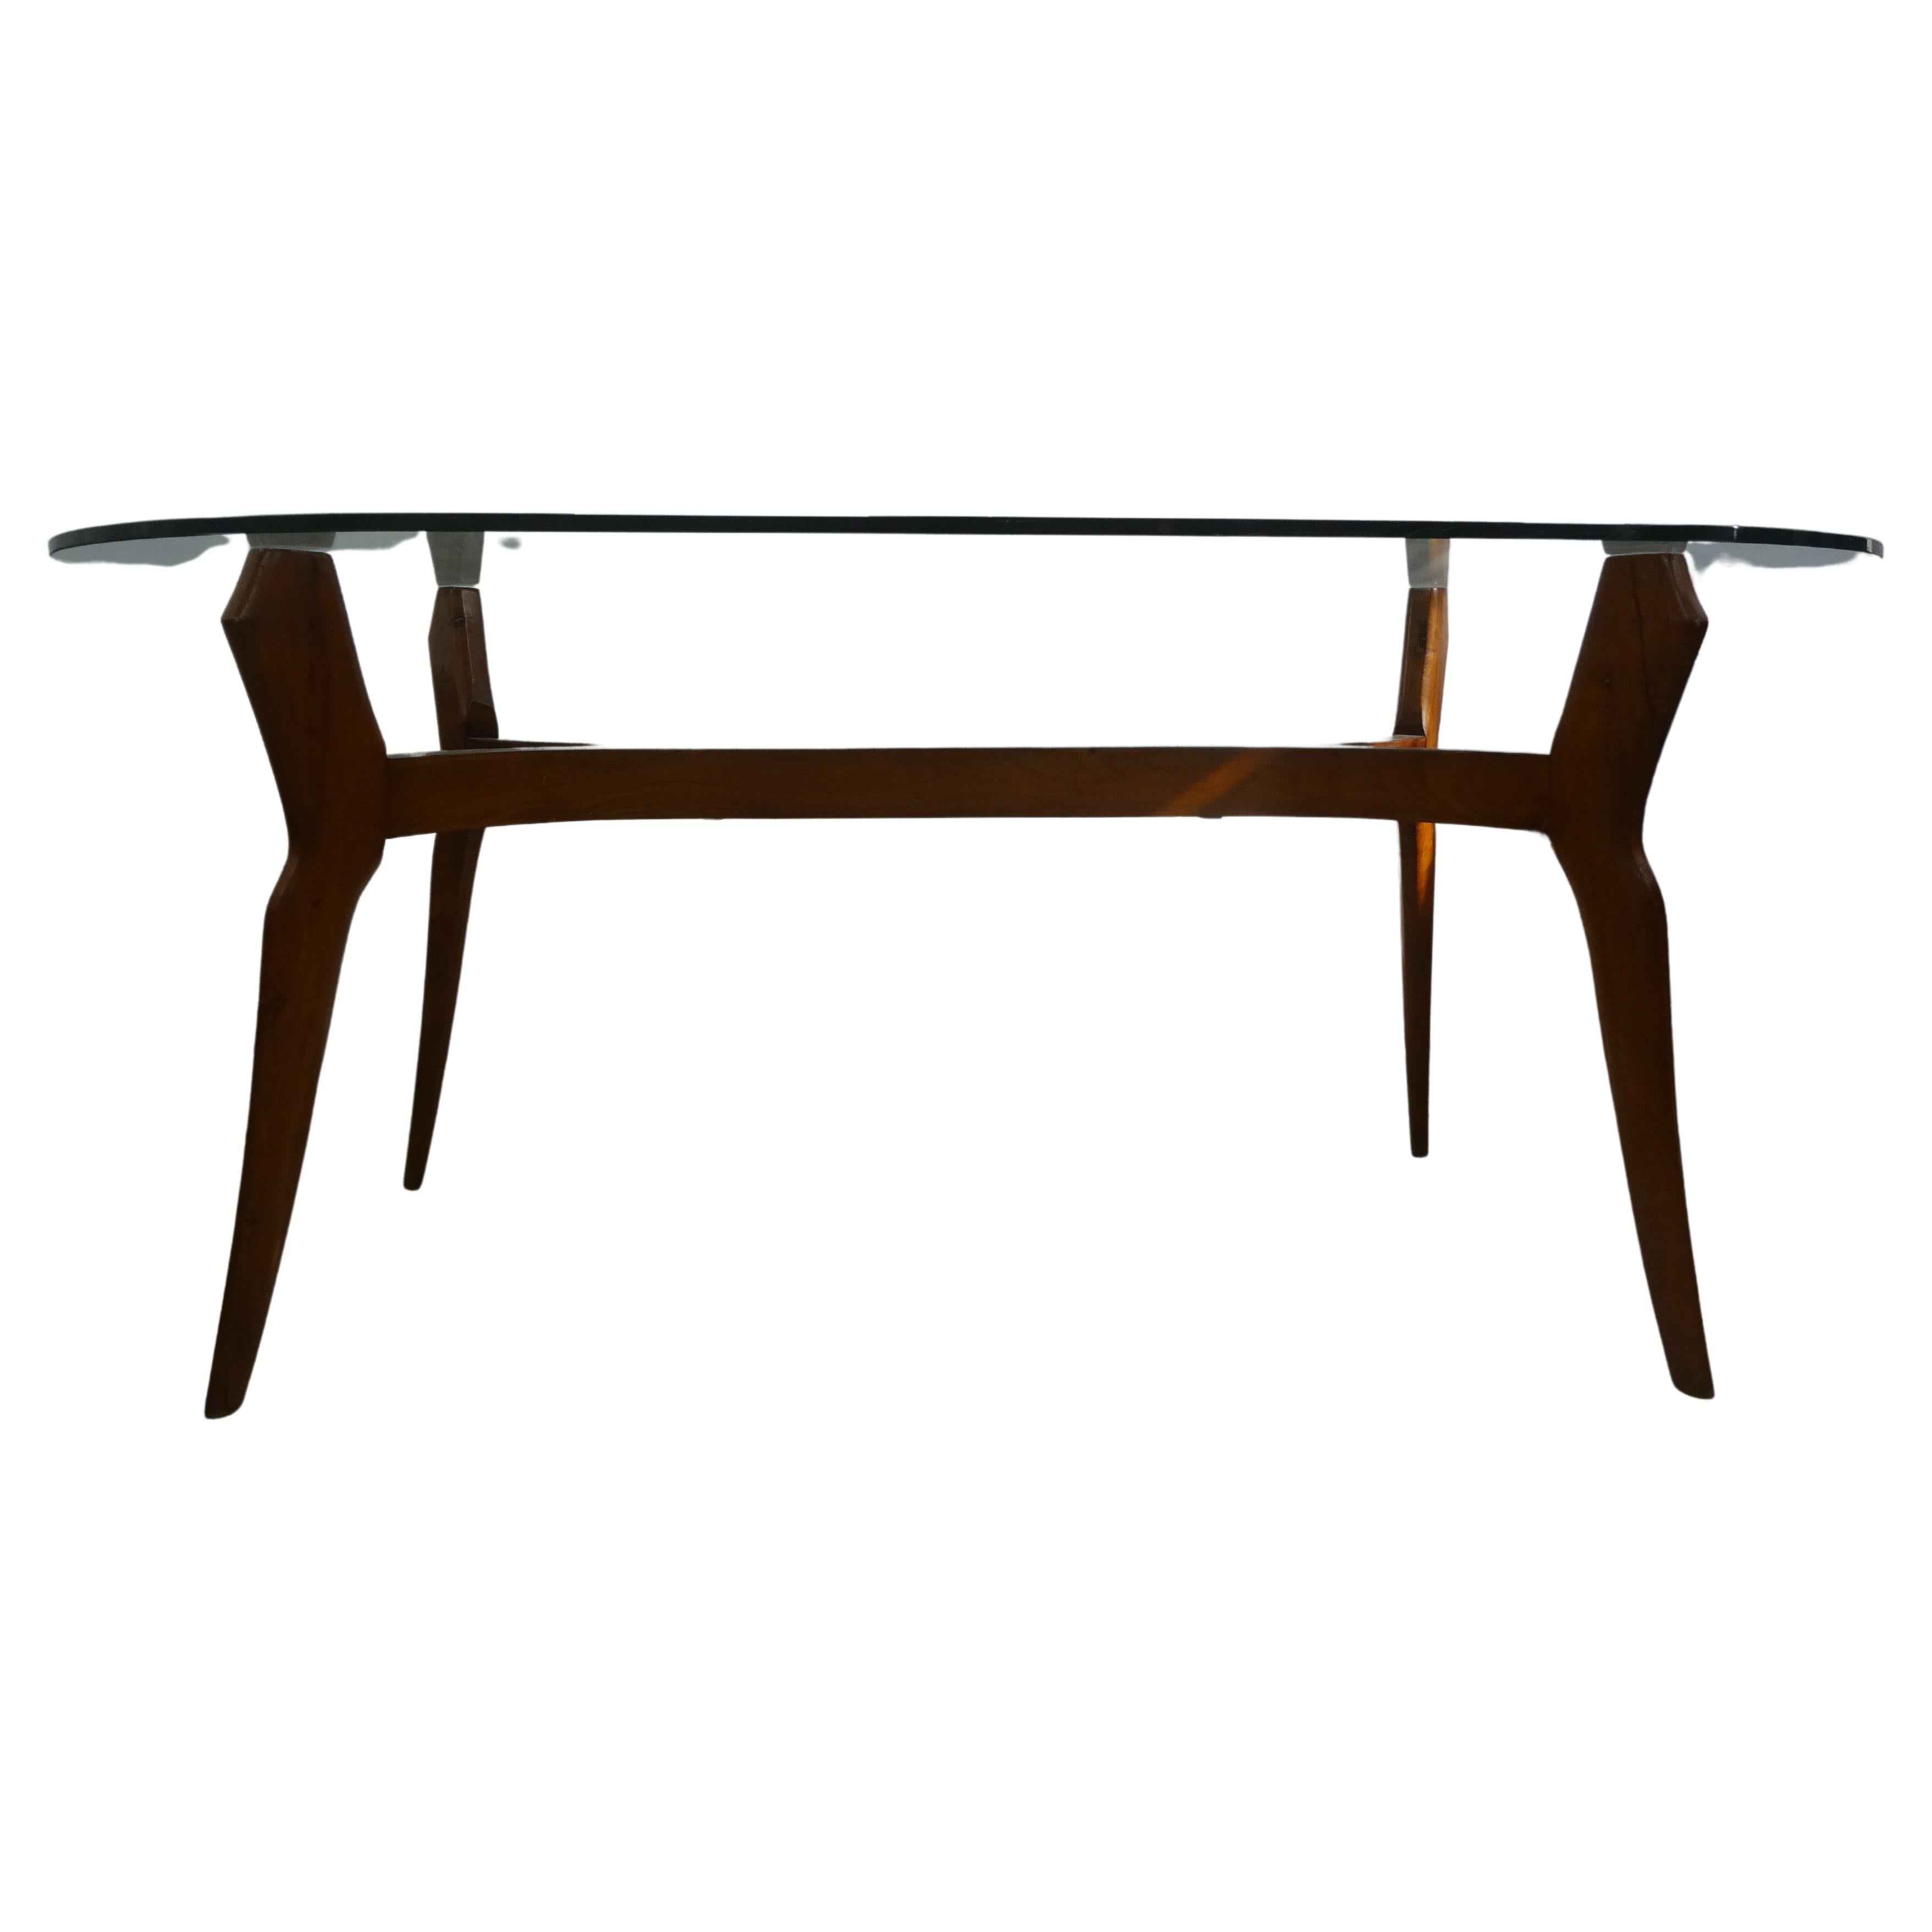 Italian Modern Sculptural Dining Table With Glass Top For Sale 6